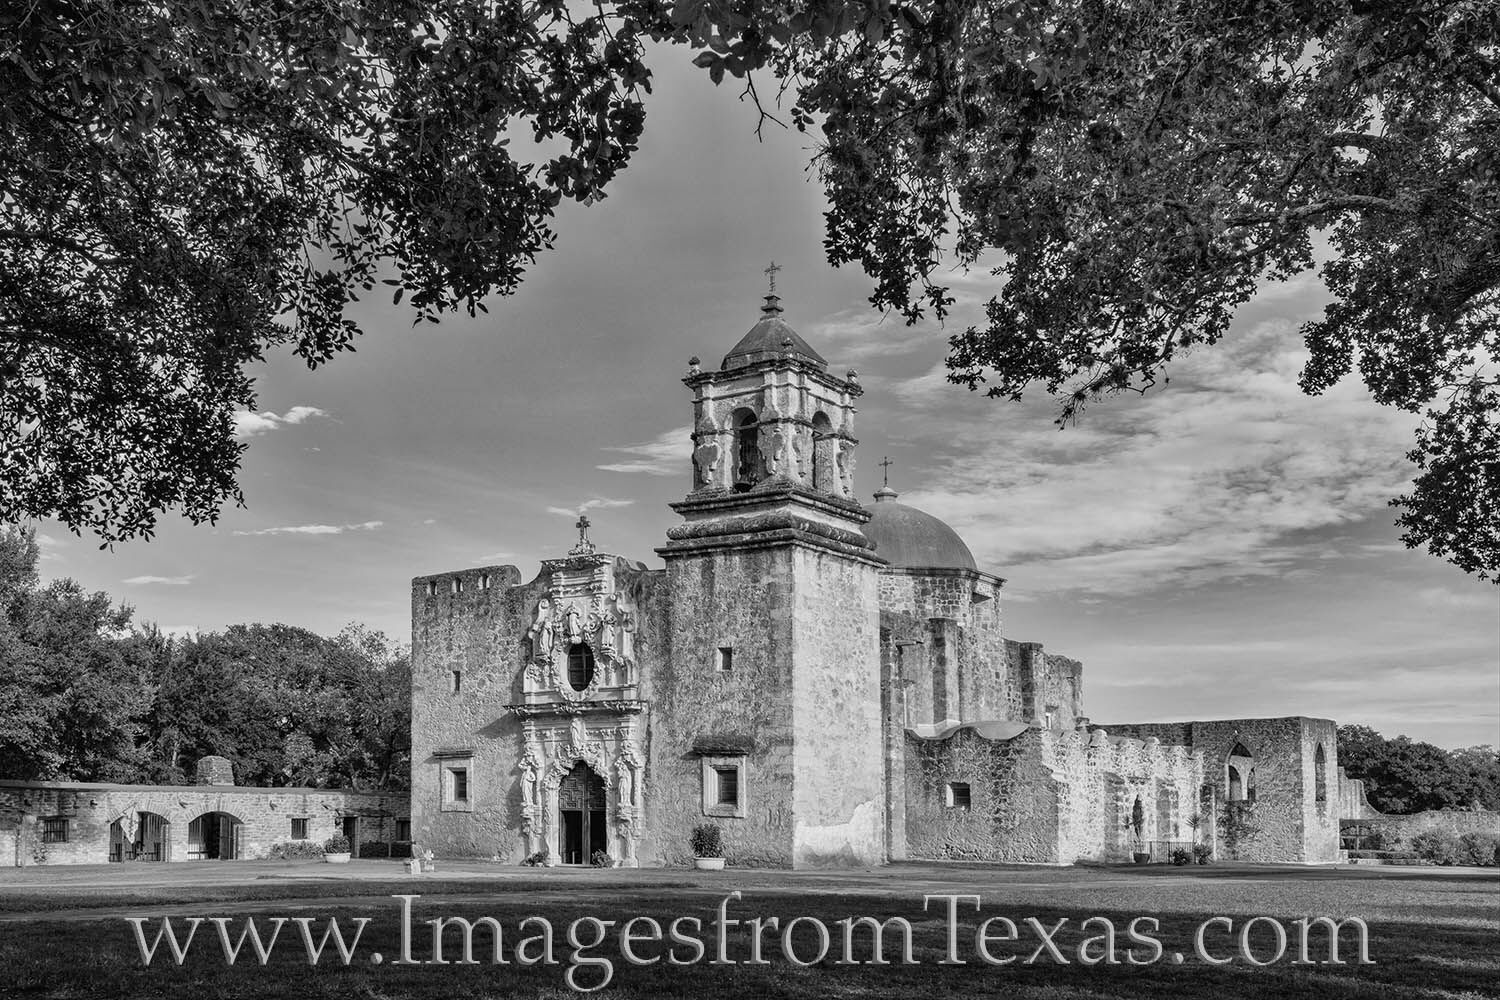 The San Jose y San Miguel de Aguayo Mission was founded in 1720 along the banks of the San Antonio River. This black and white...